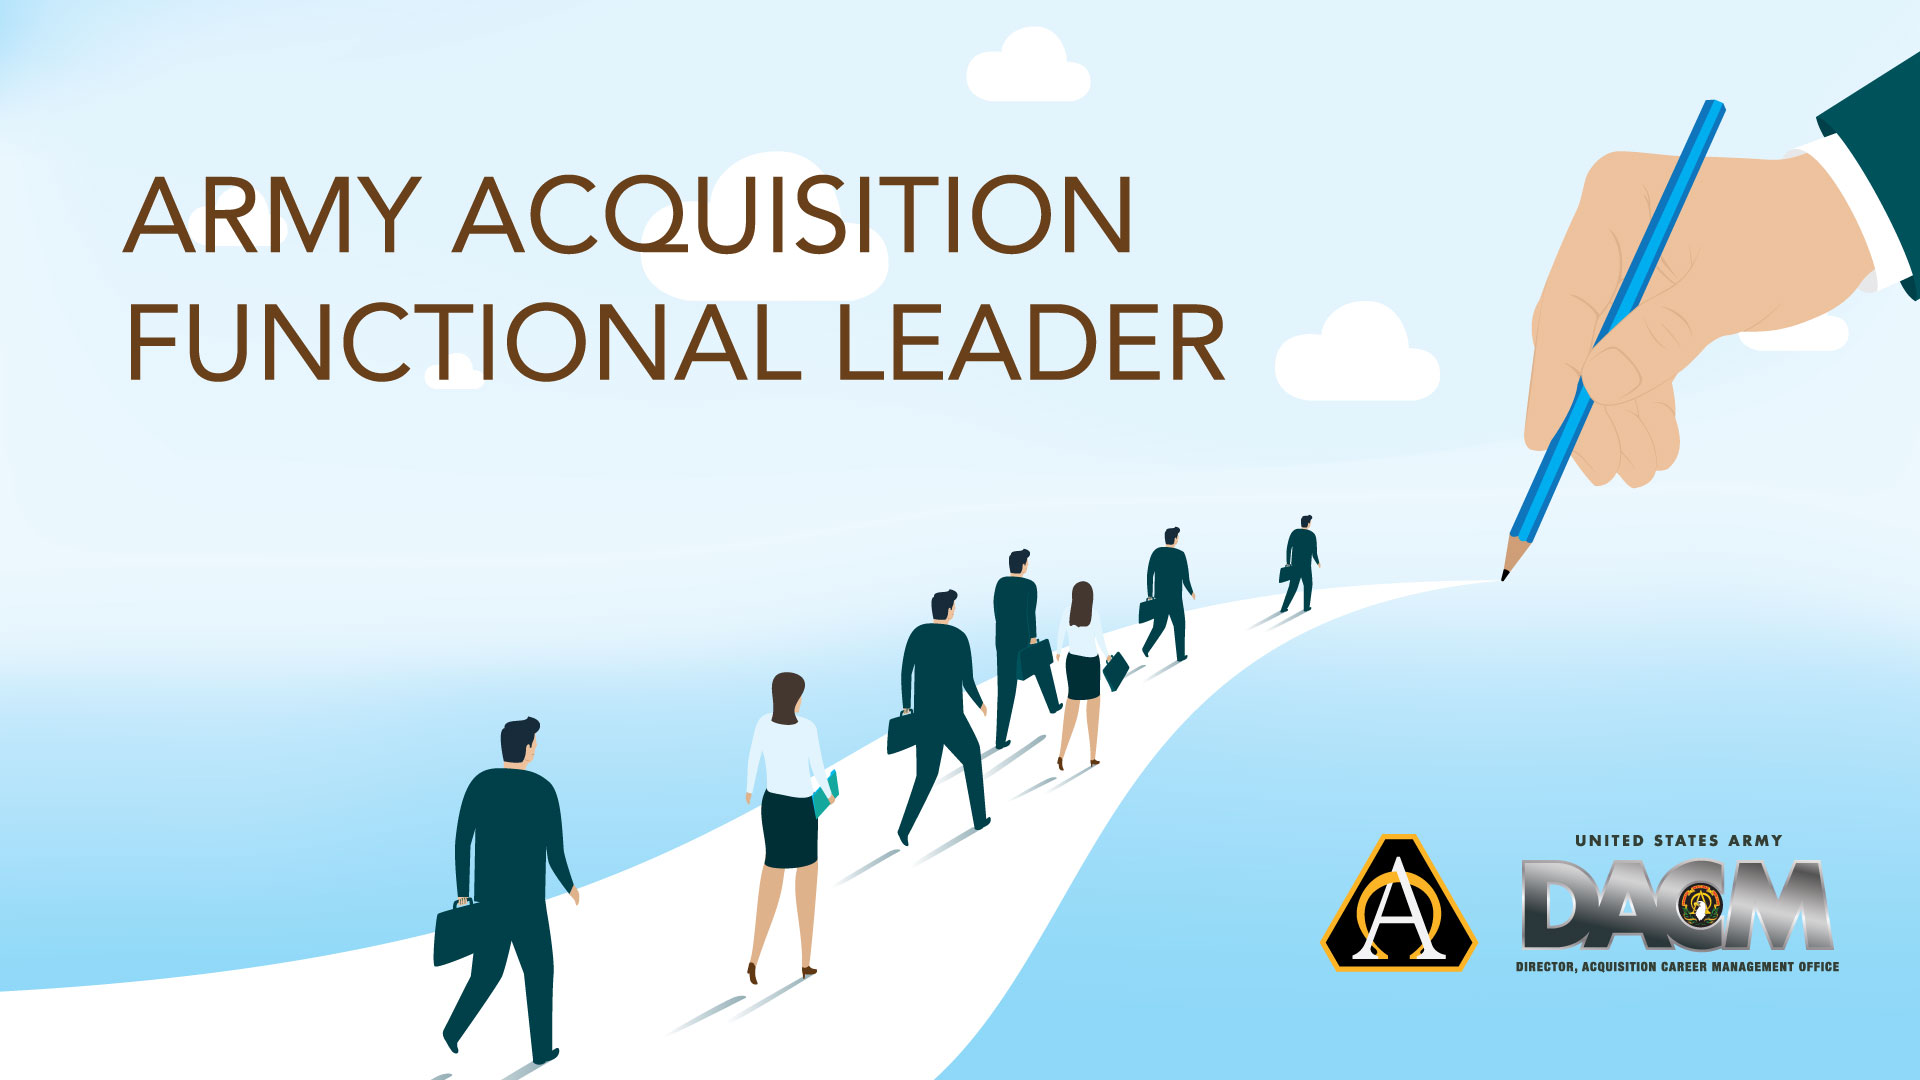 Army Acquisition Functional Leader